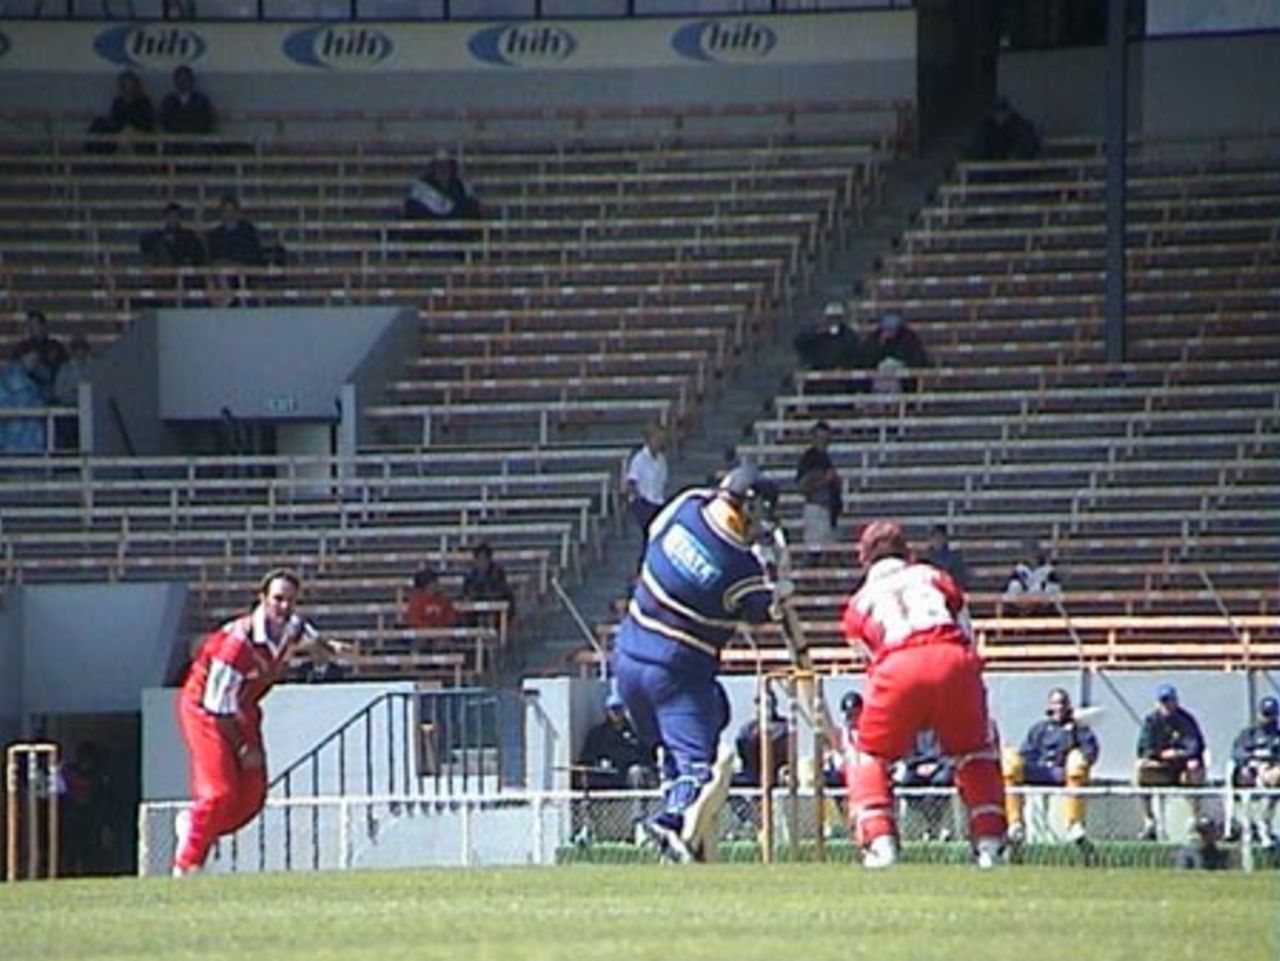 Otago batsman Chris Gaffaney plays a ball from Canterbury medium pacer Nathan Astle into the covers, Shell Cup: Canterbury v Otago at Jade Stadium, Christchurch, 16 January 2001